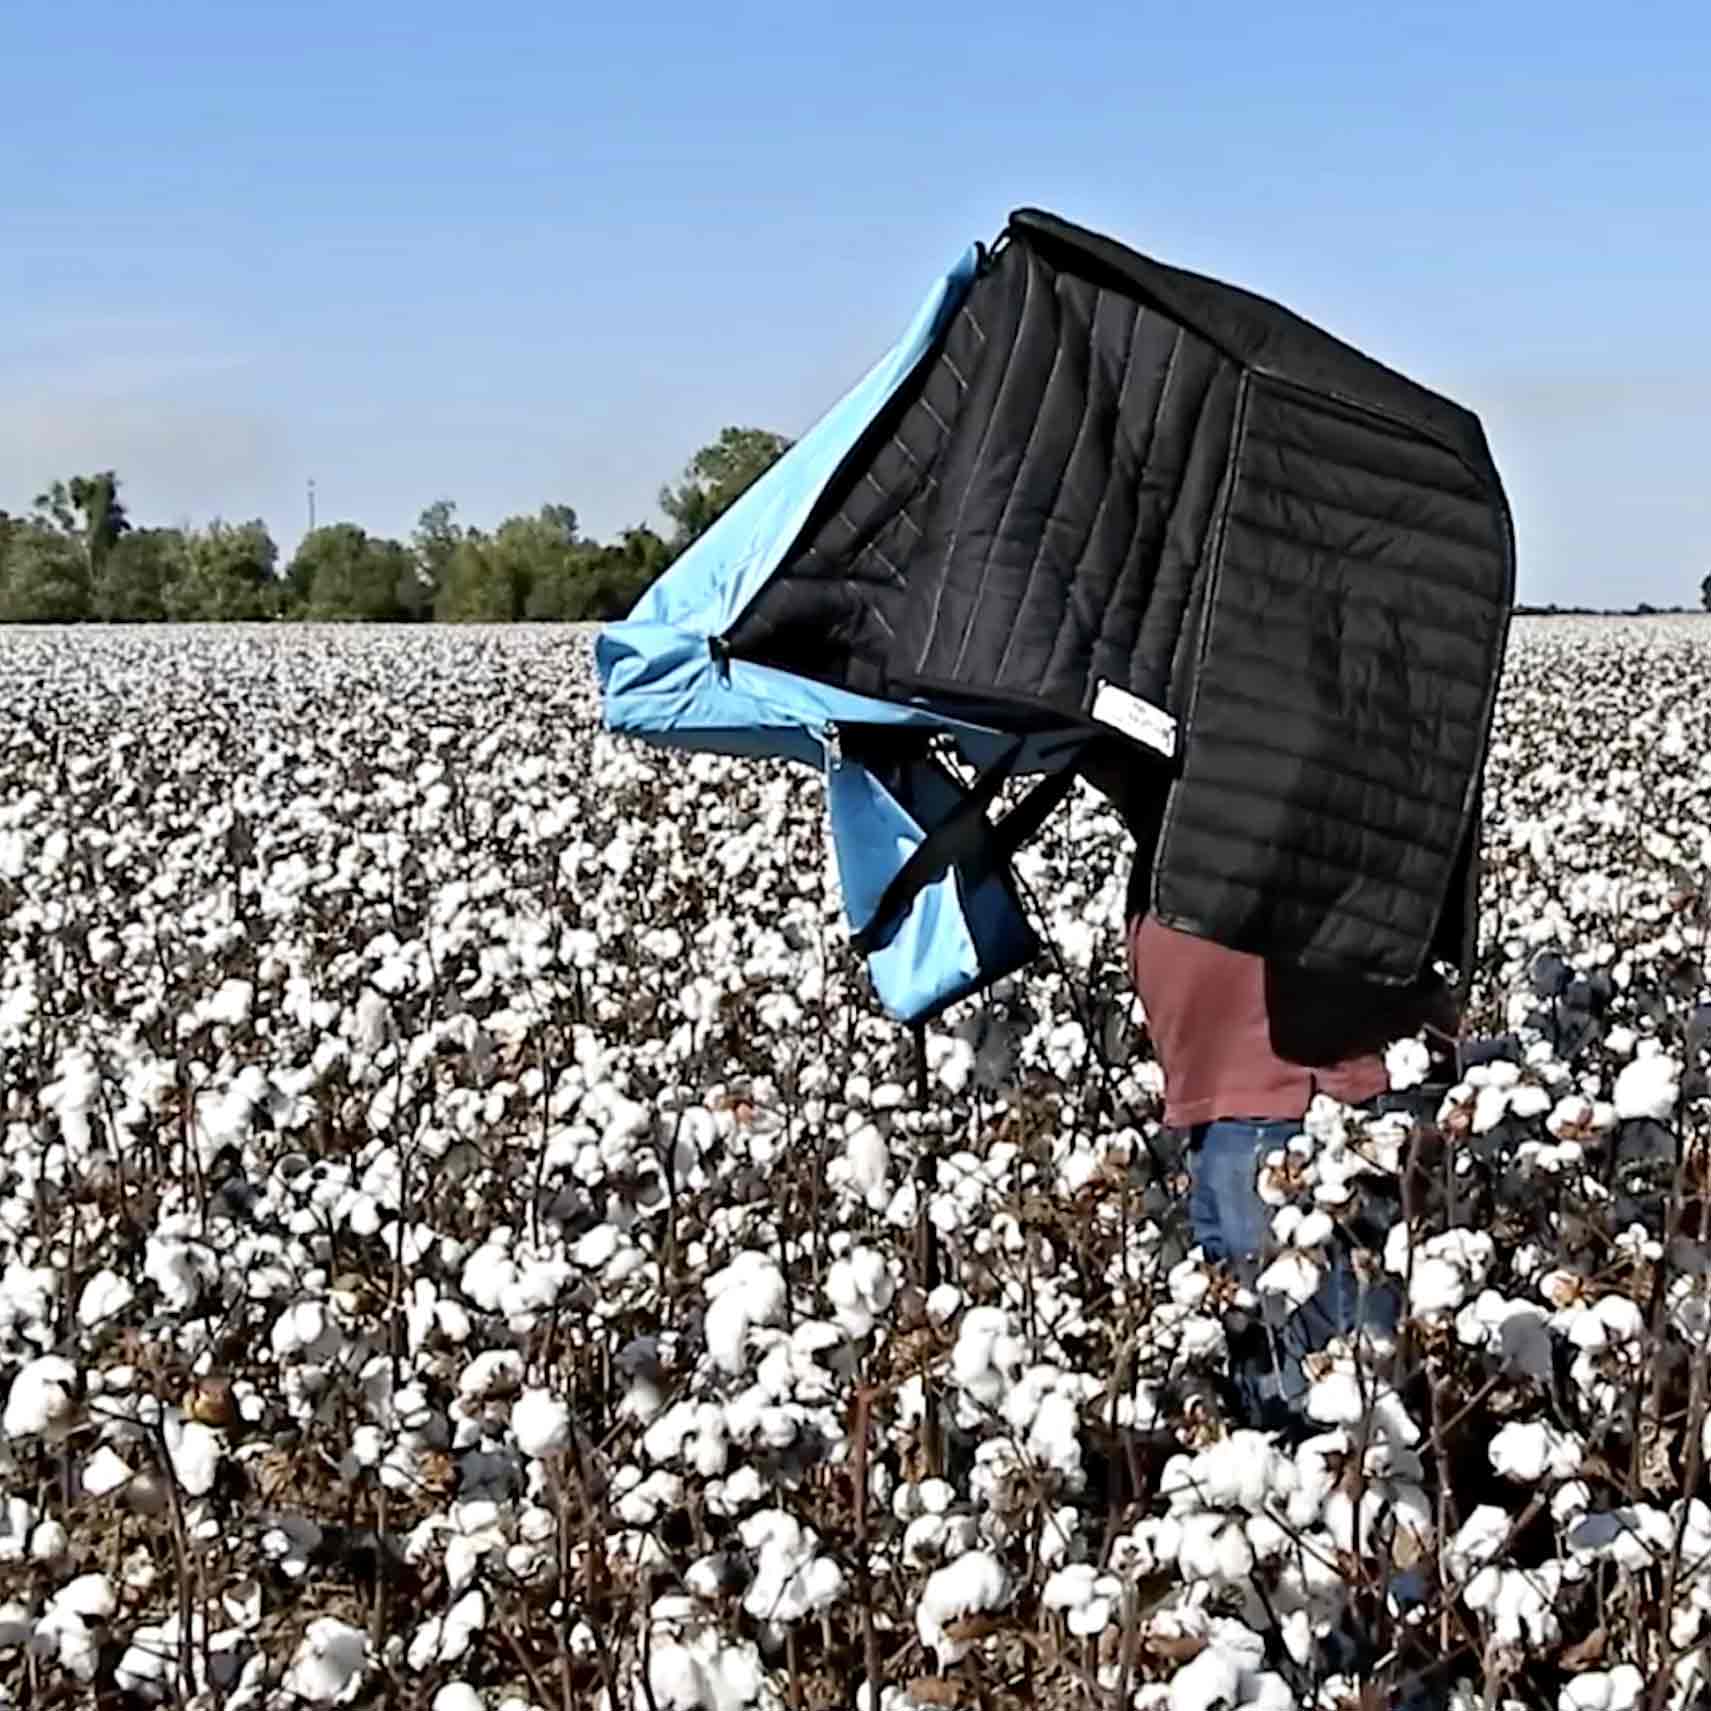 PORTABLE VOCAL BOOTH IN COTTON FIELD